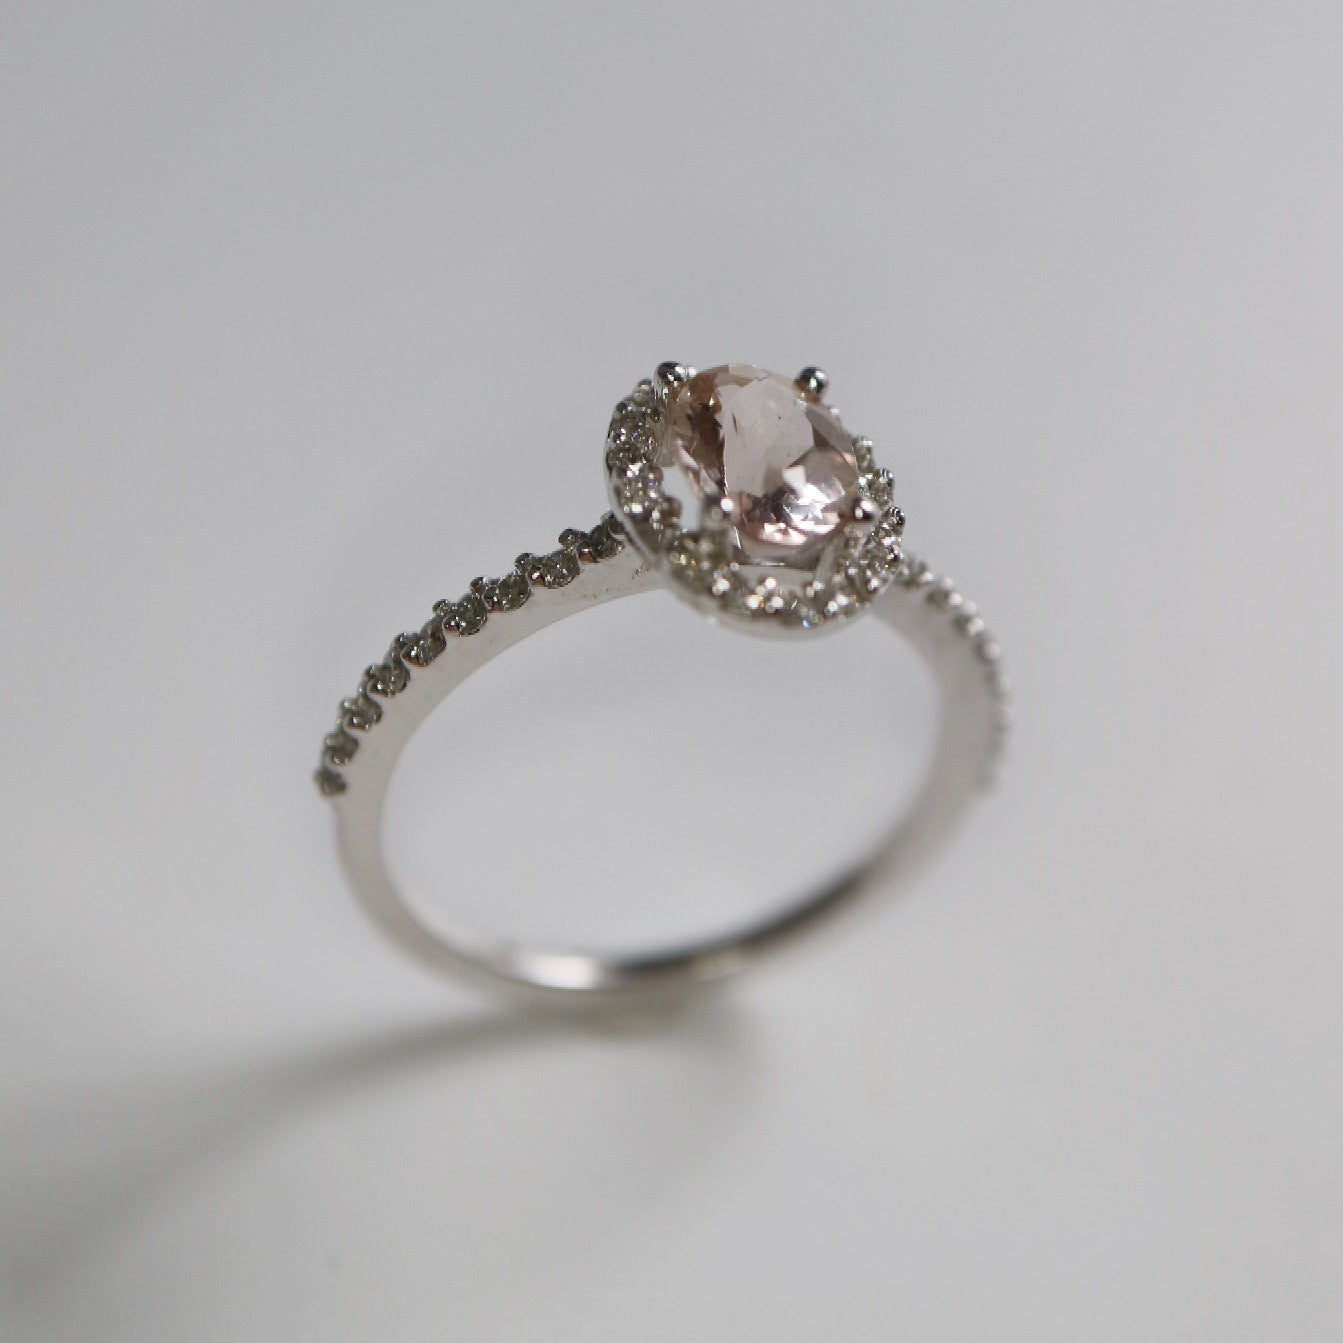 9ct white gold Morganite and Diamond Engagement Ring with halo